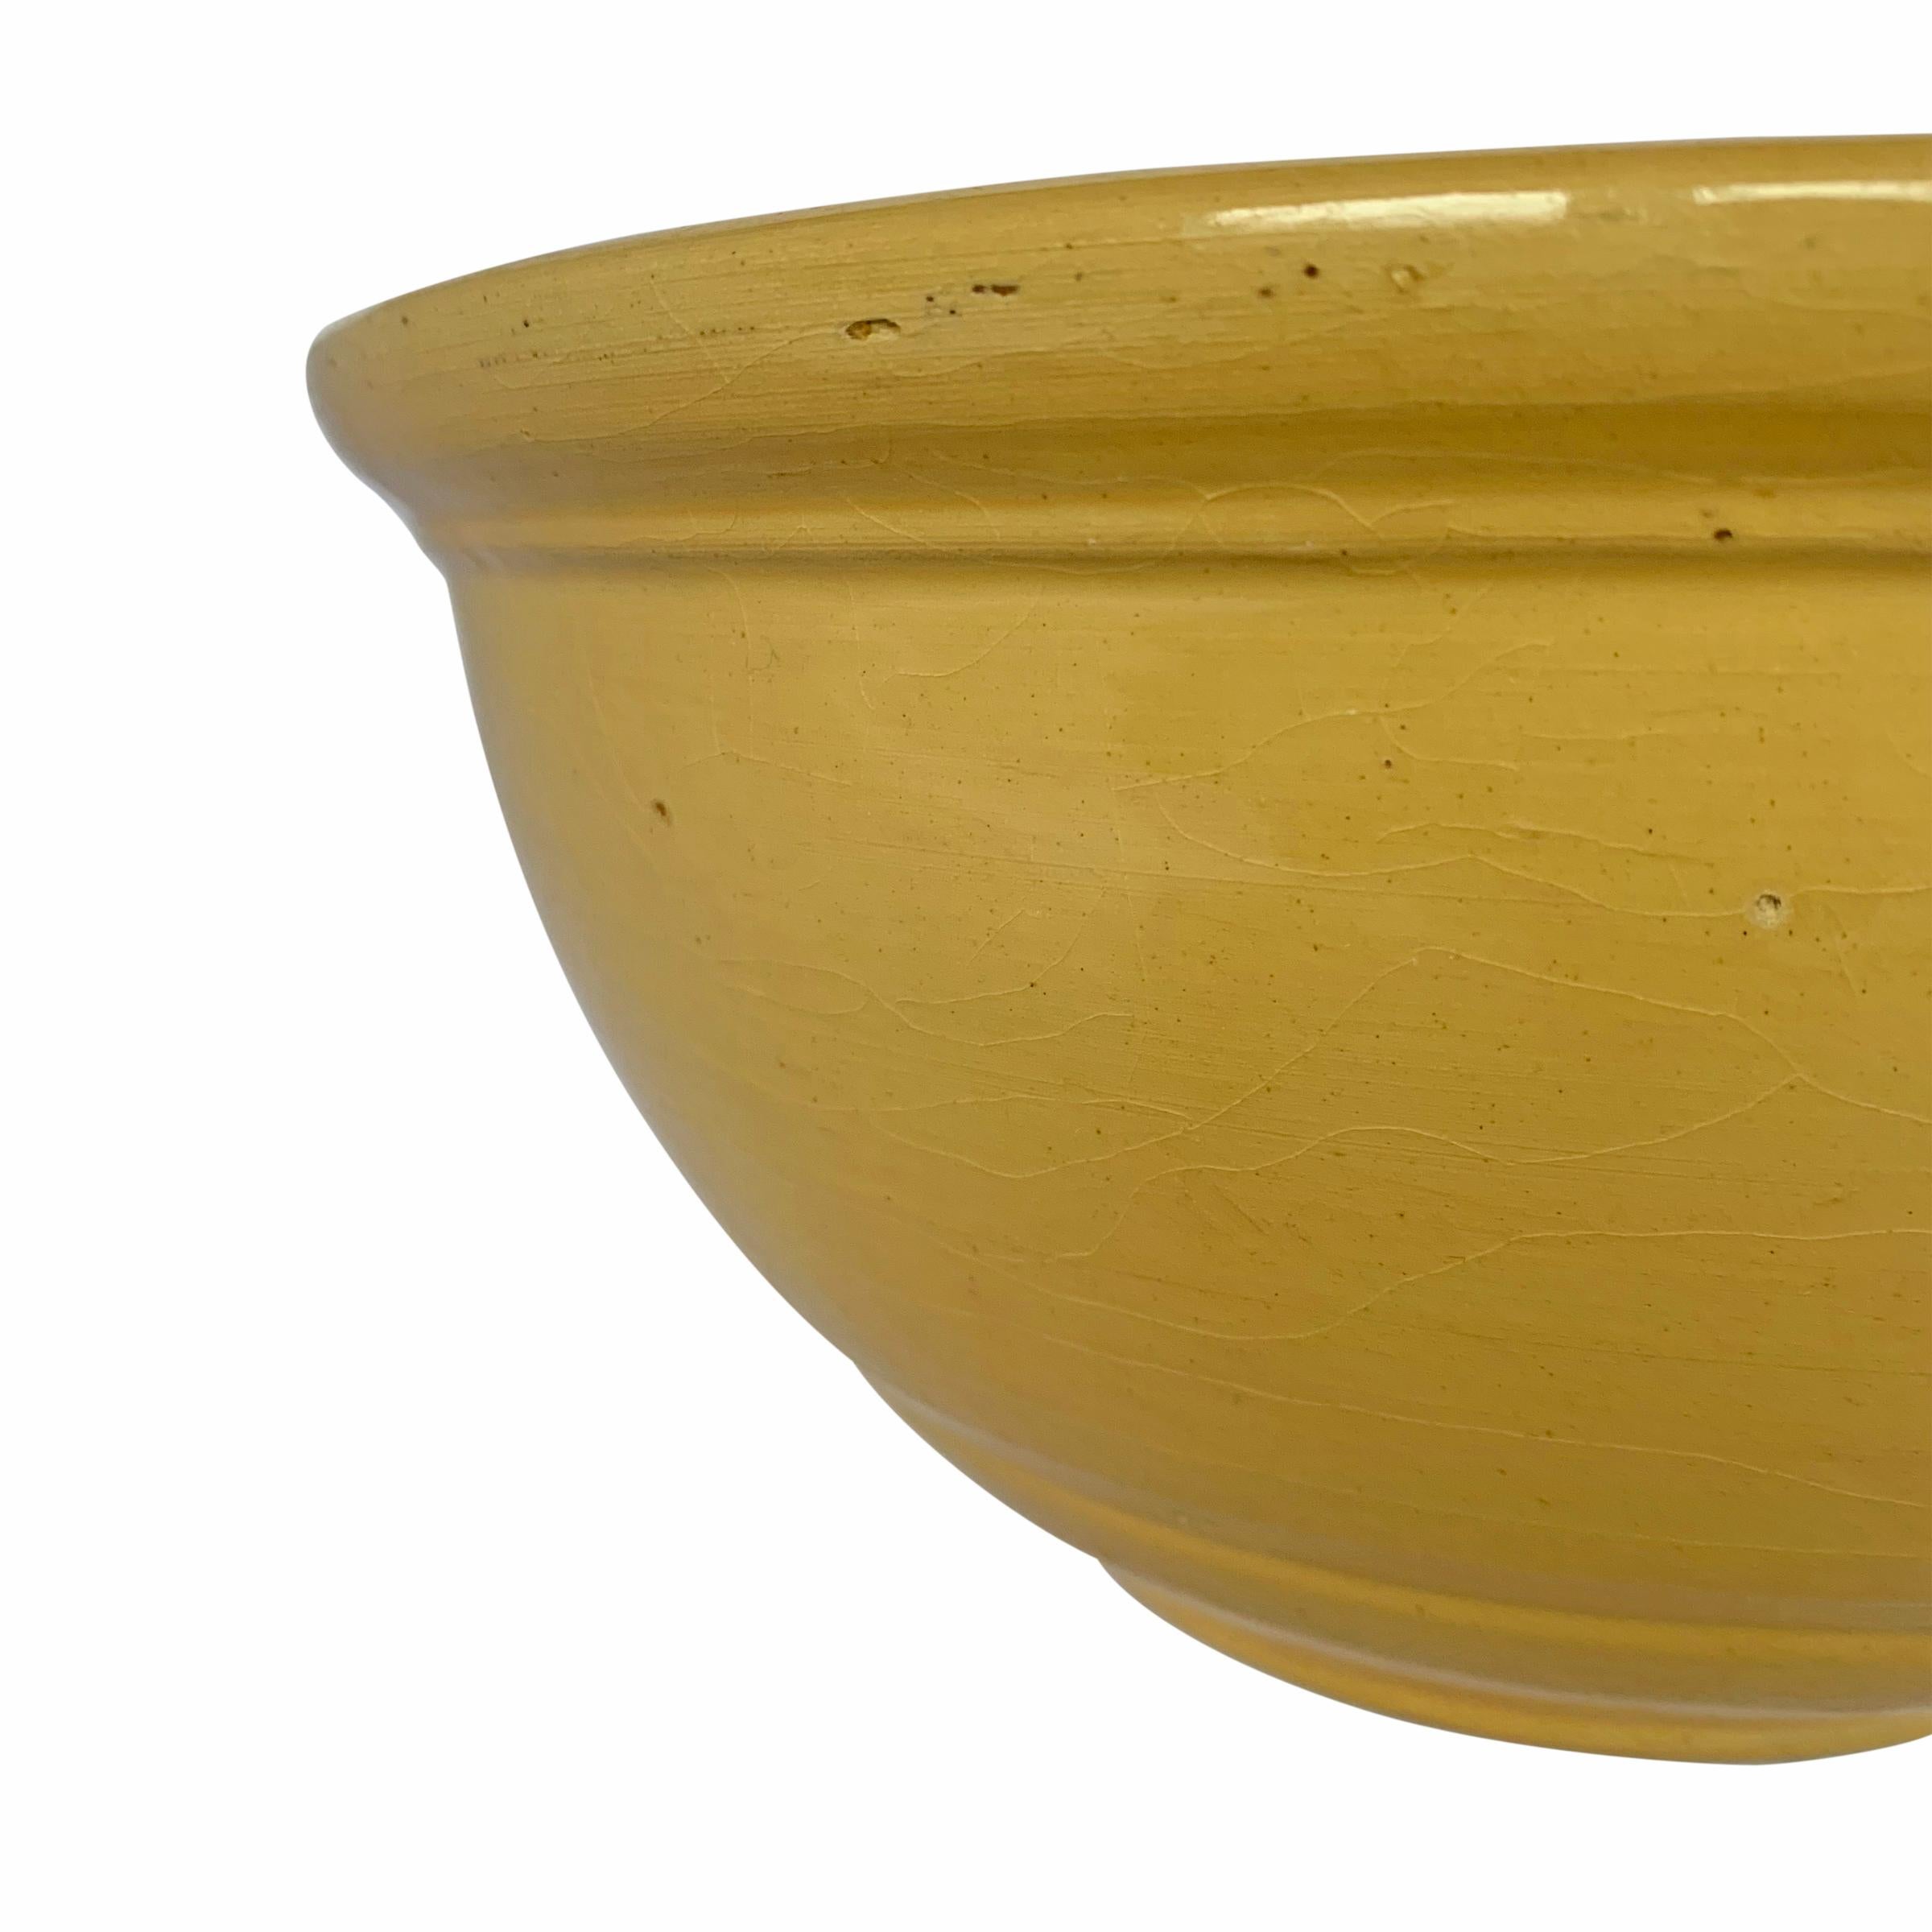 Set of Two 19th Century American Yellowware Mixing Bowls 1